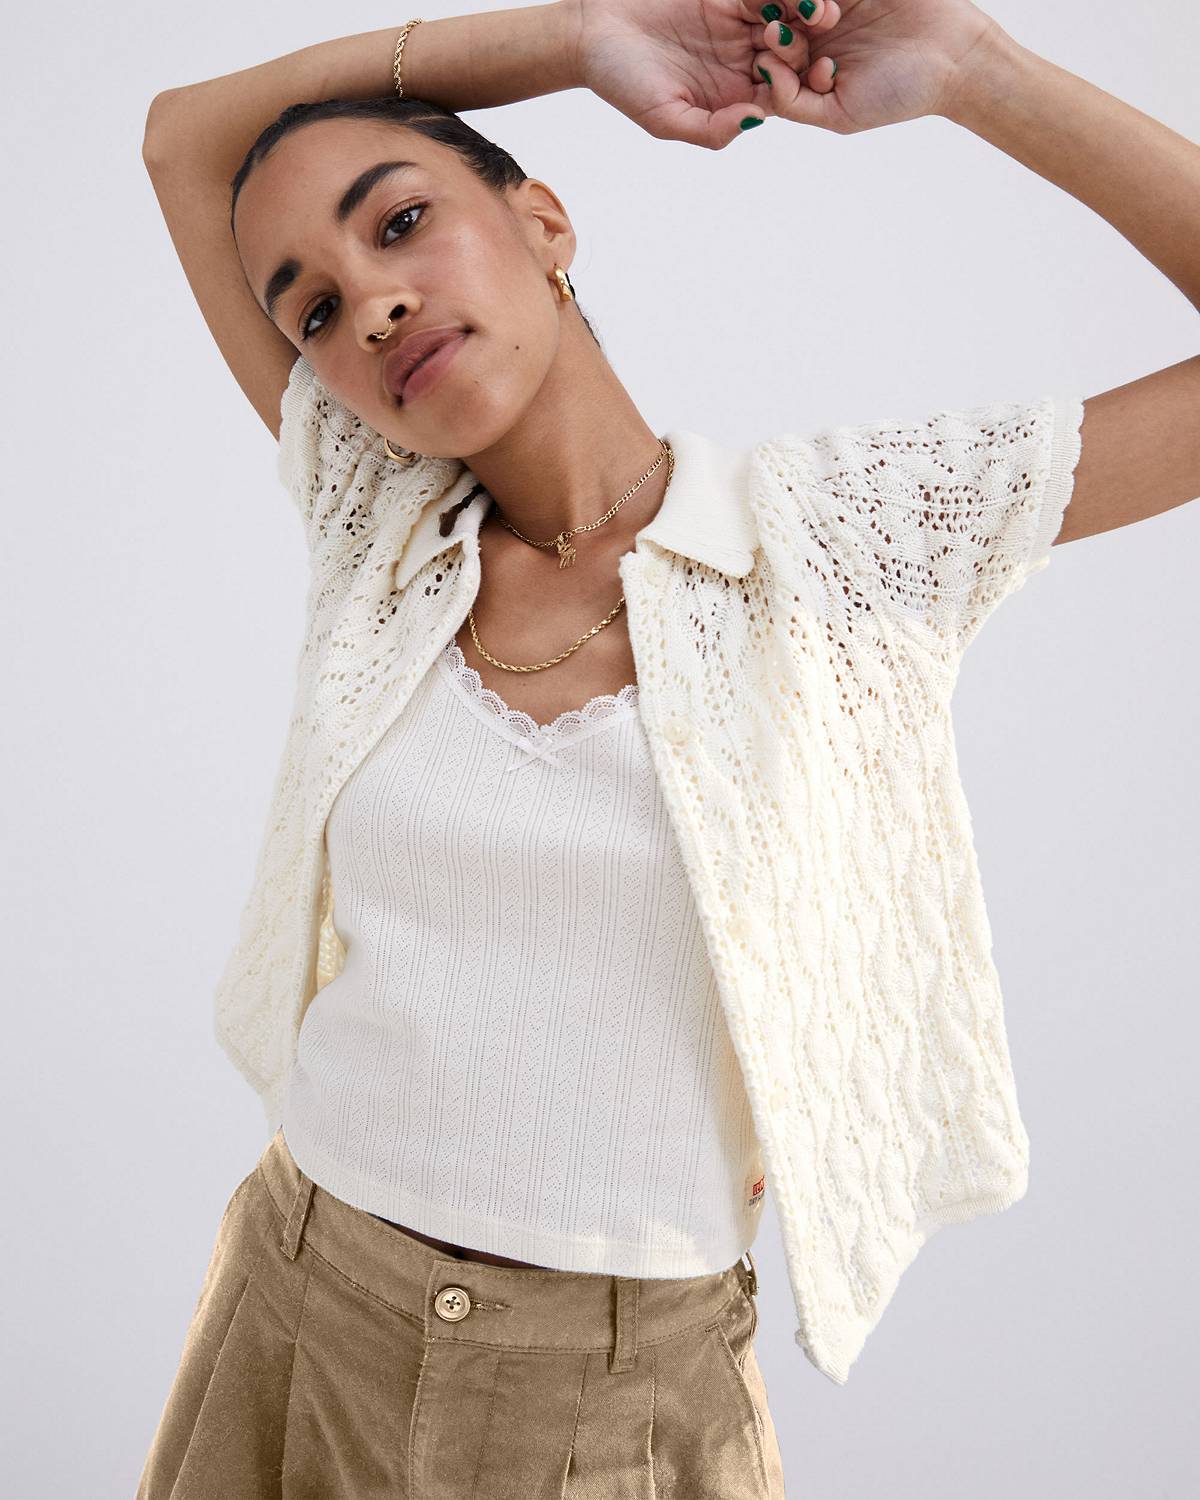 Model in white women's knit sweater shirt and tank